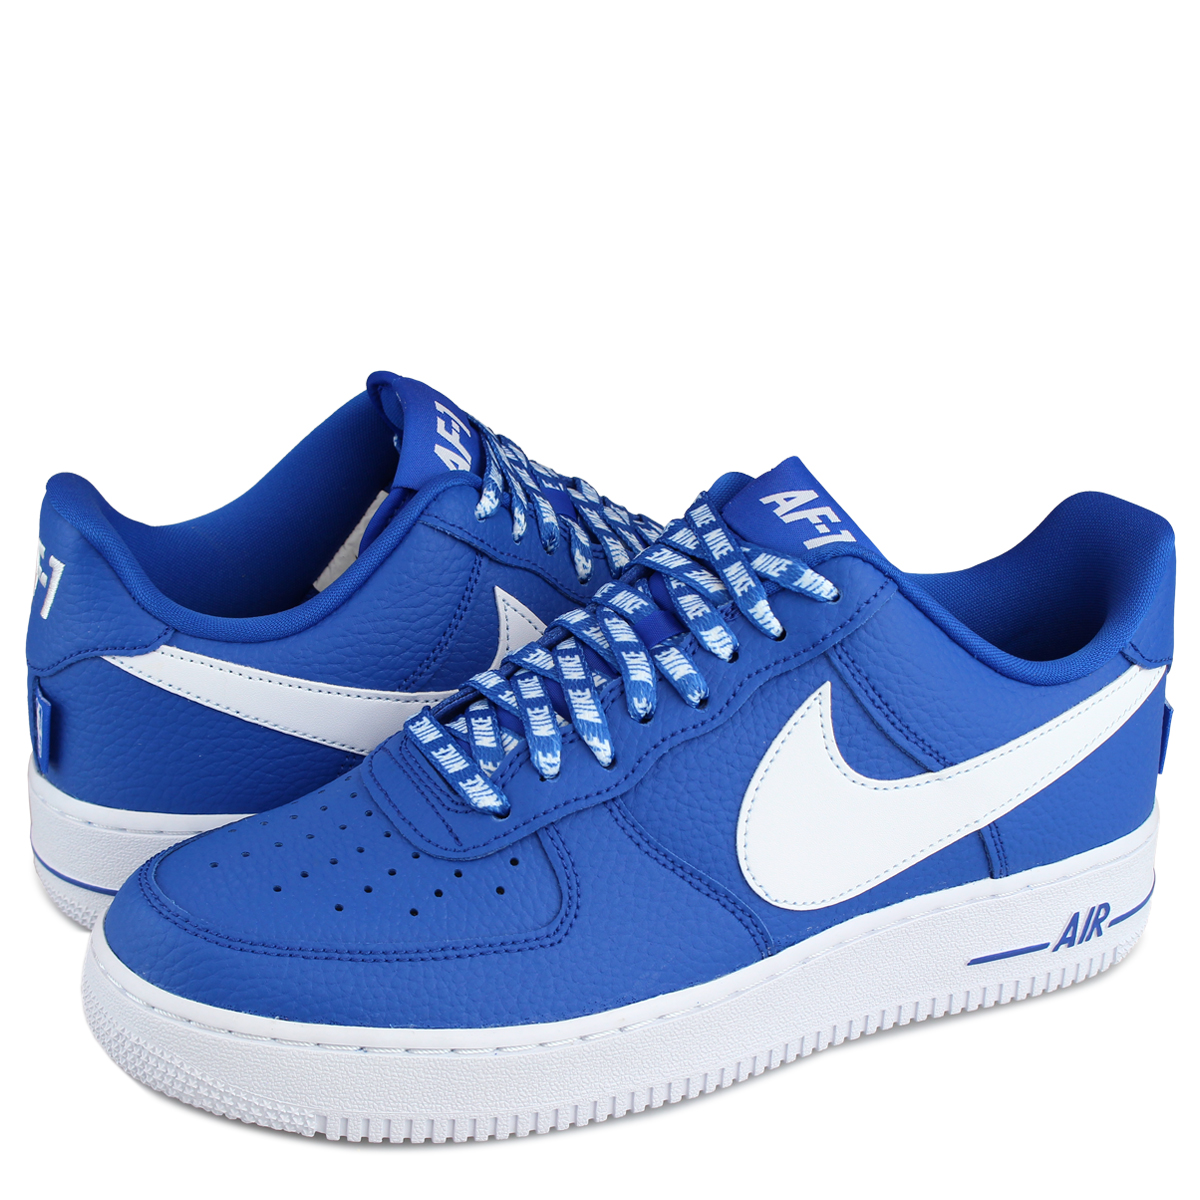 air force 1s blue and white